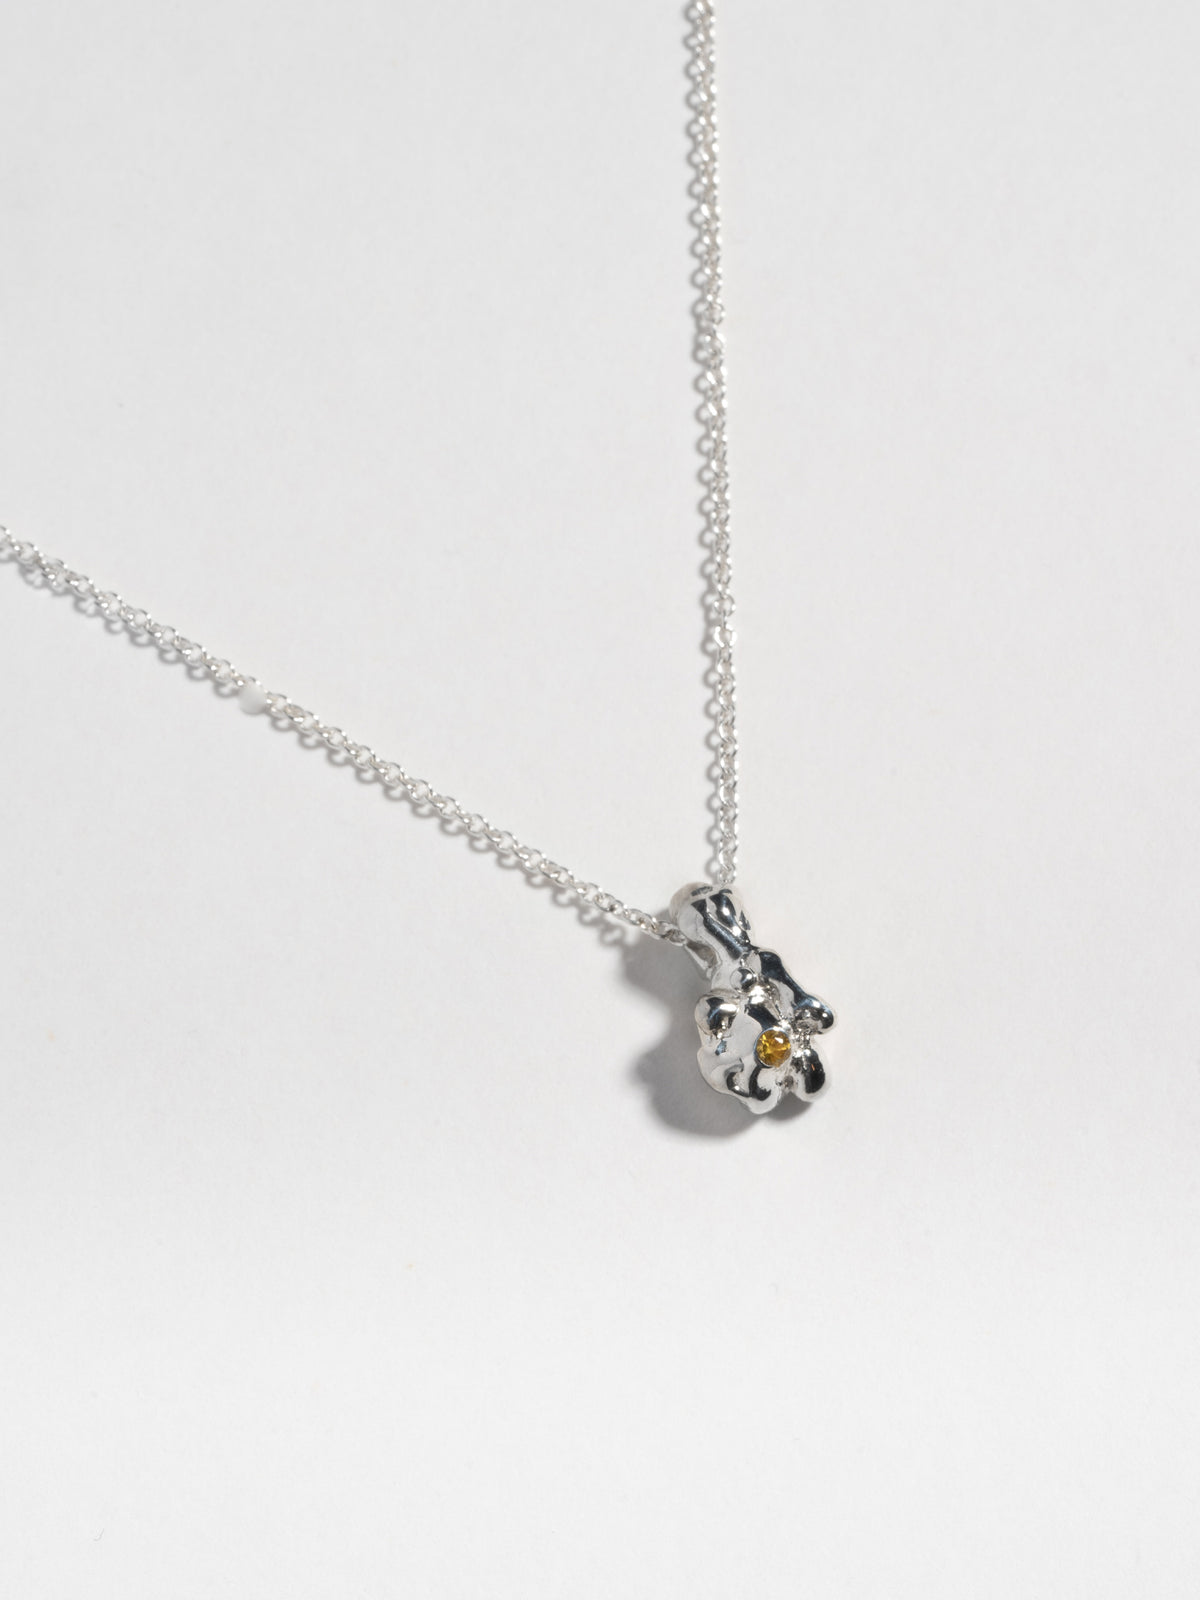 Close up image of Sterling silver GOBBO Necklace pendant with yellow sapphire